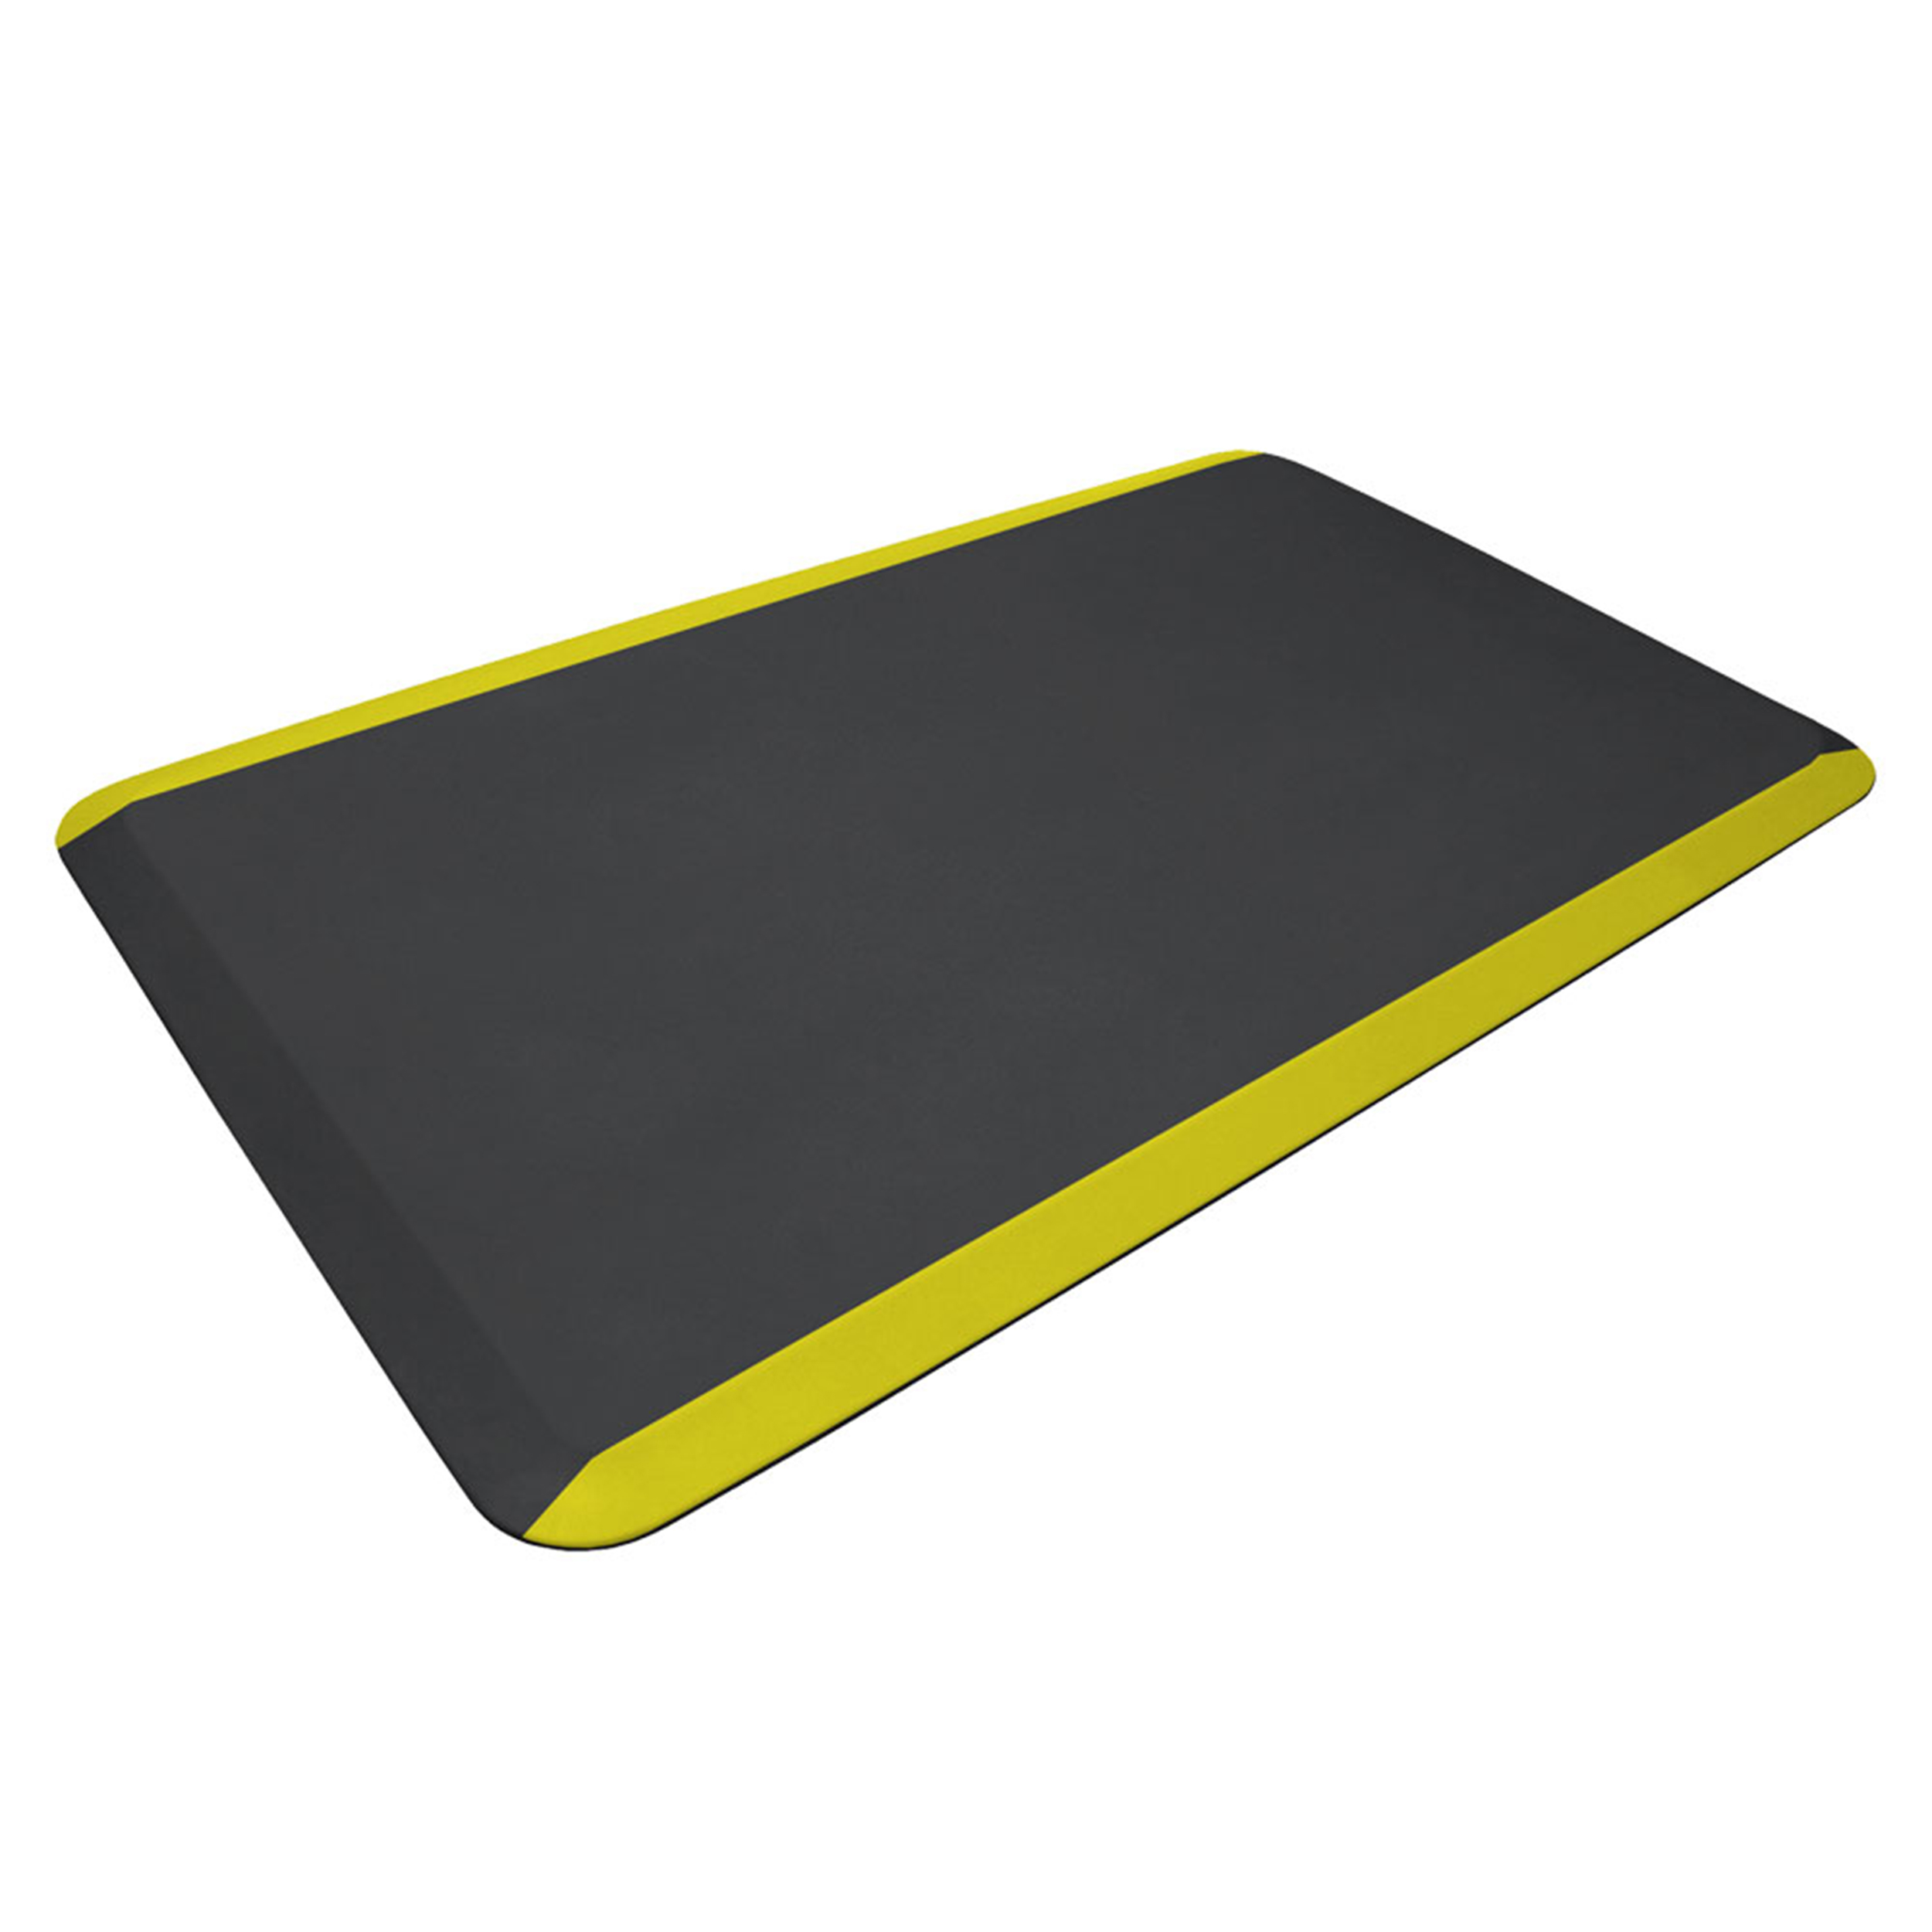 Eco-pro Commercial Mat, Black With Yellow Safety Stripe, 24" X 36"